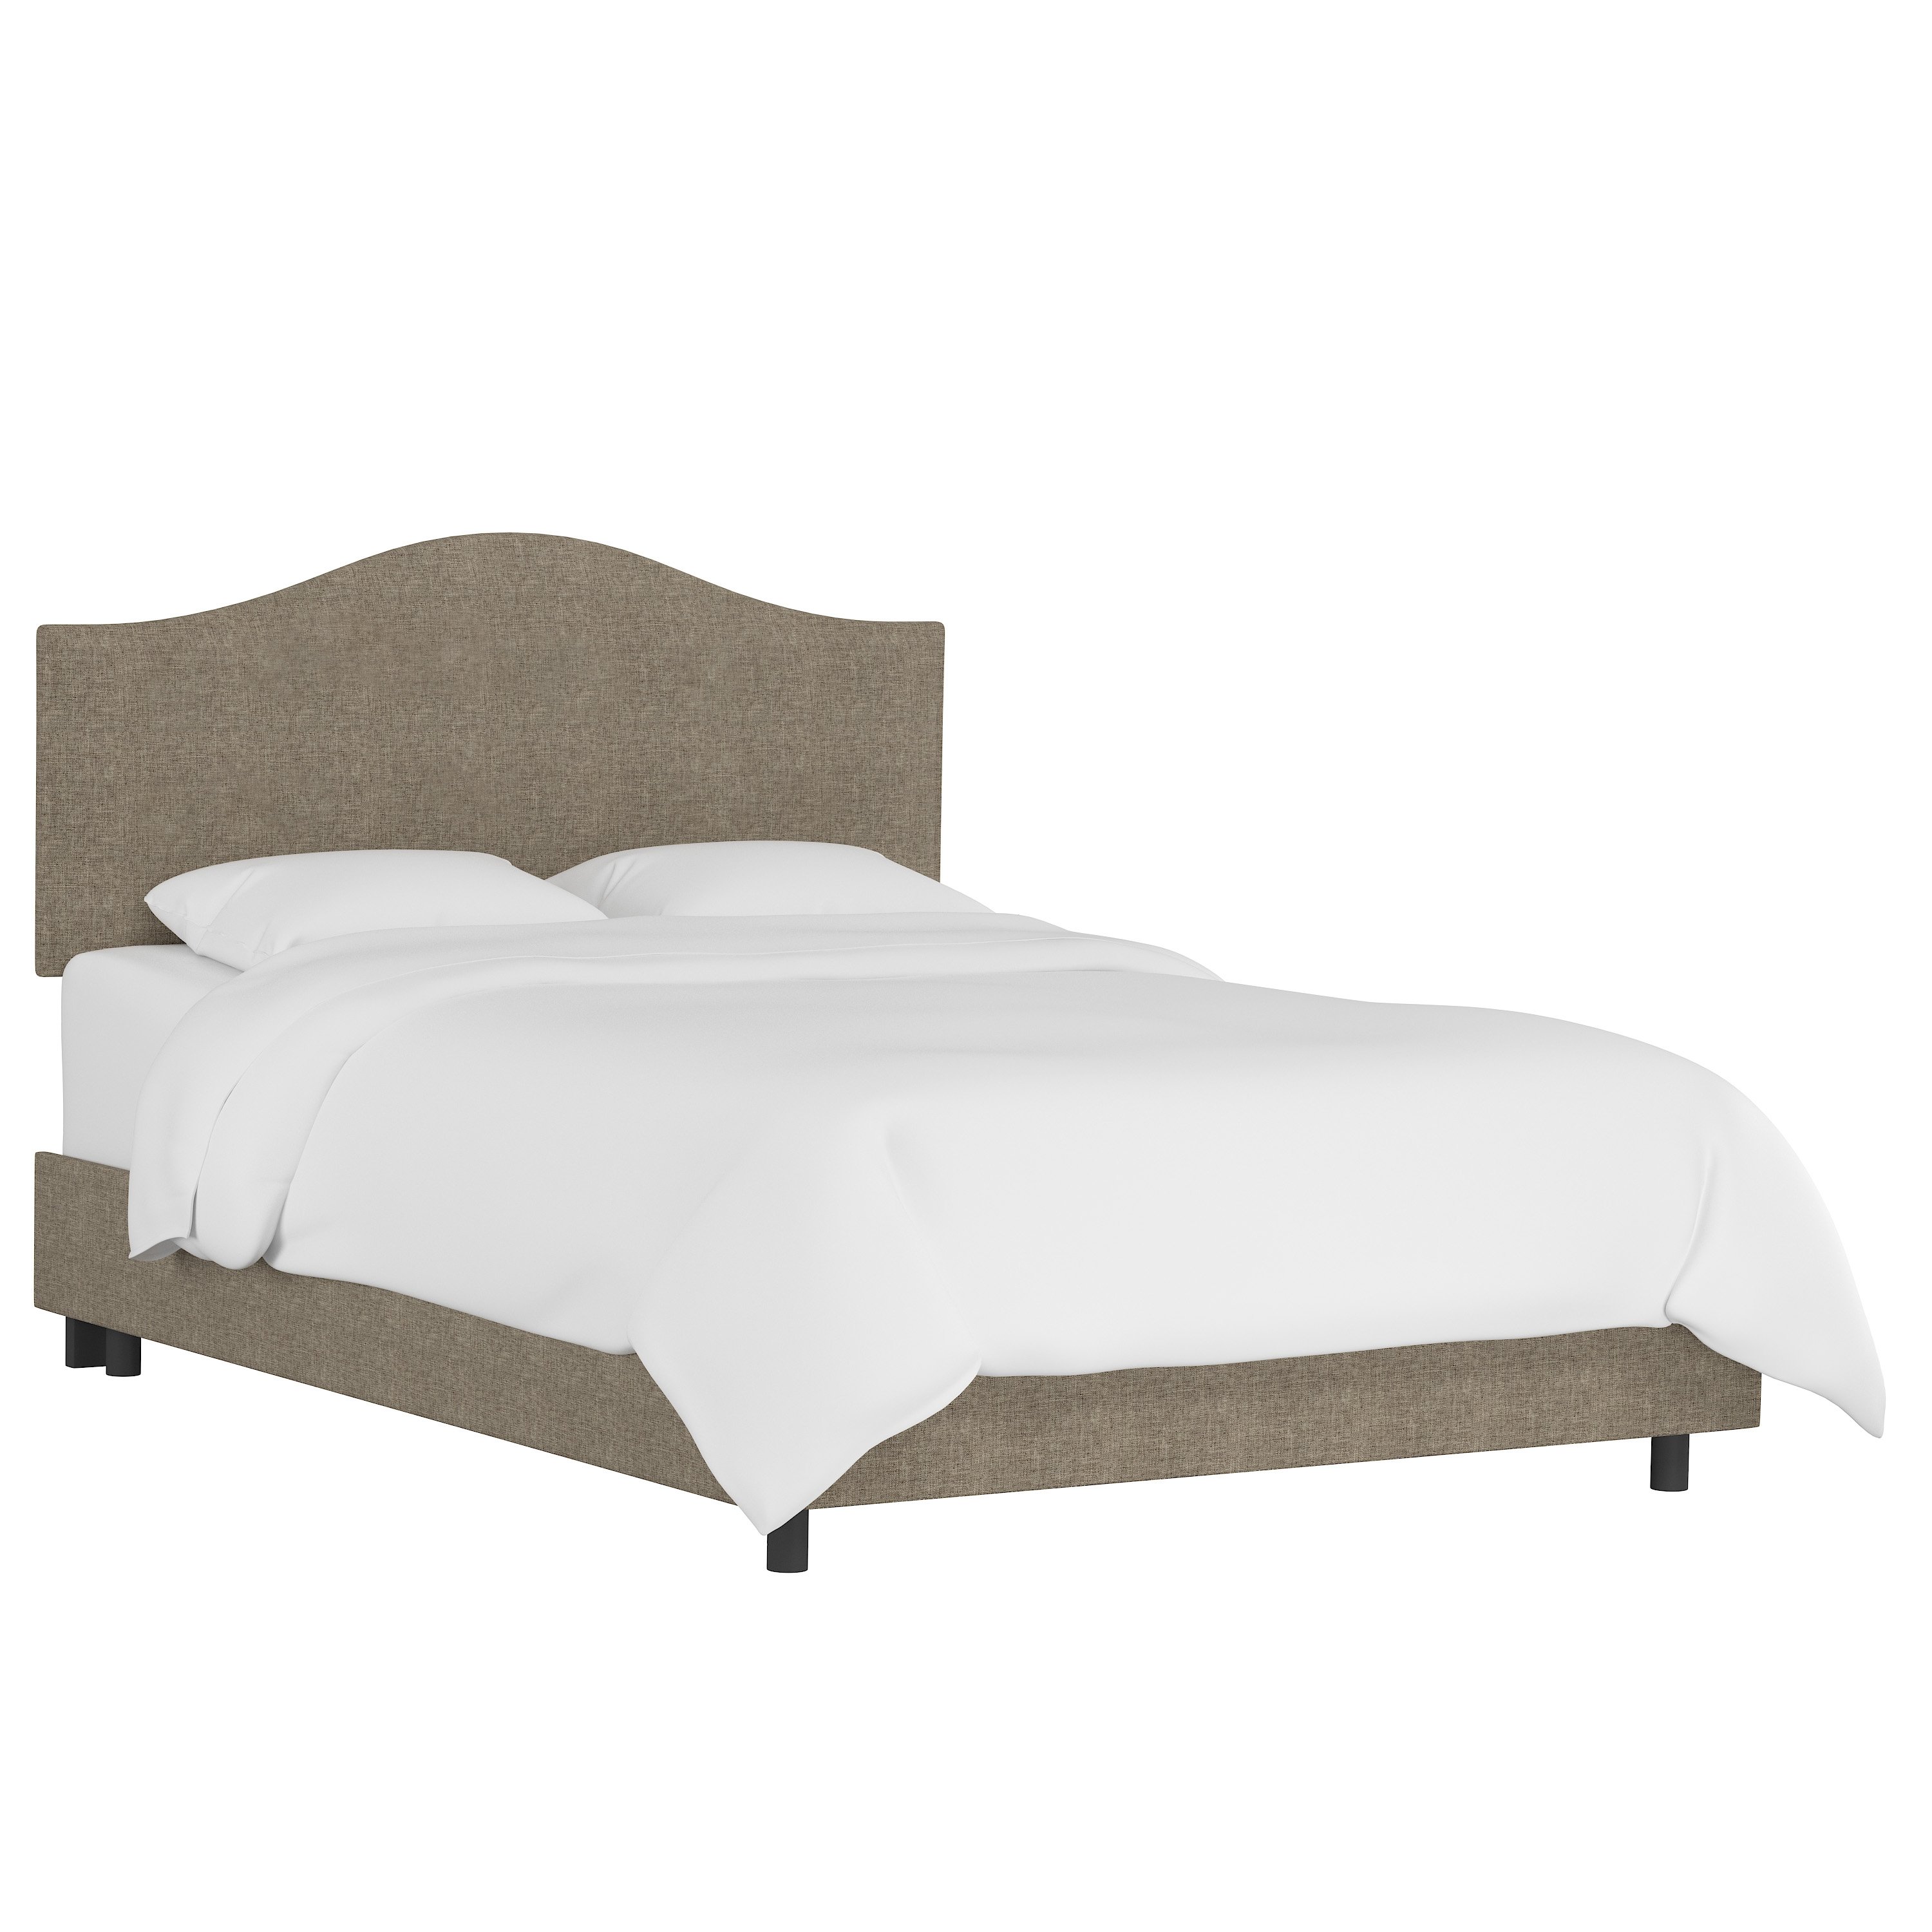 King Kenmore Bed in Zuma Linen - Image 0